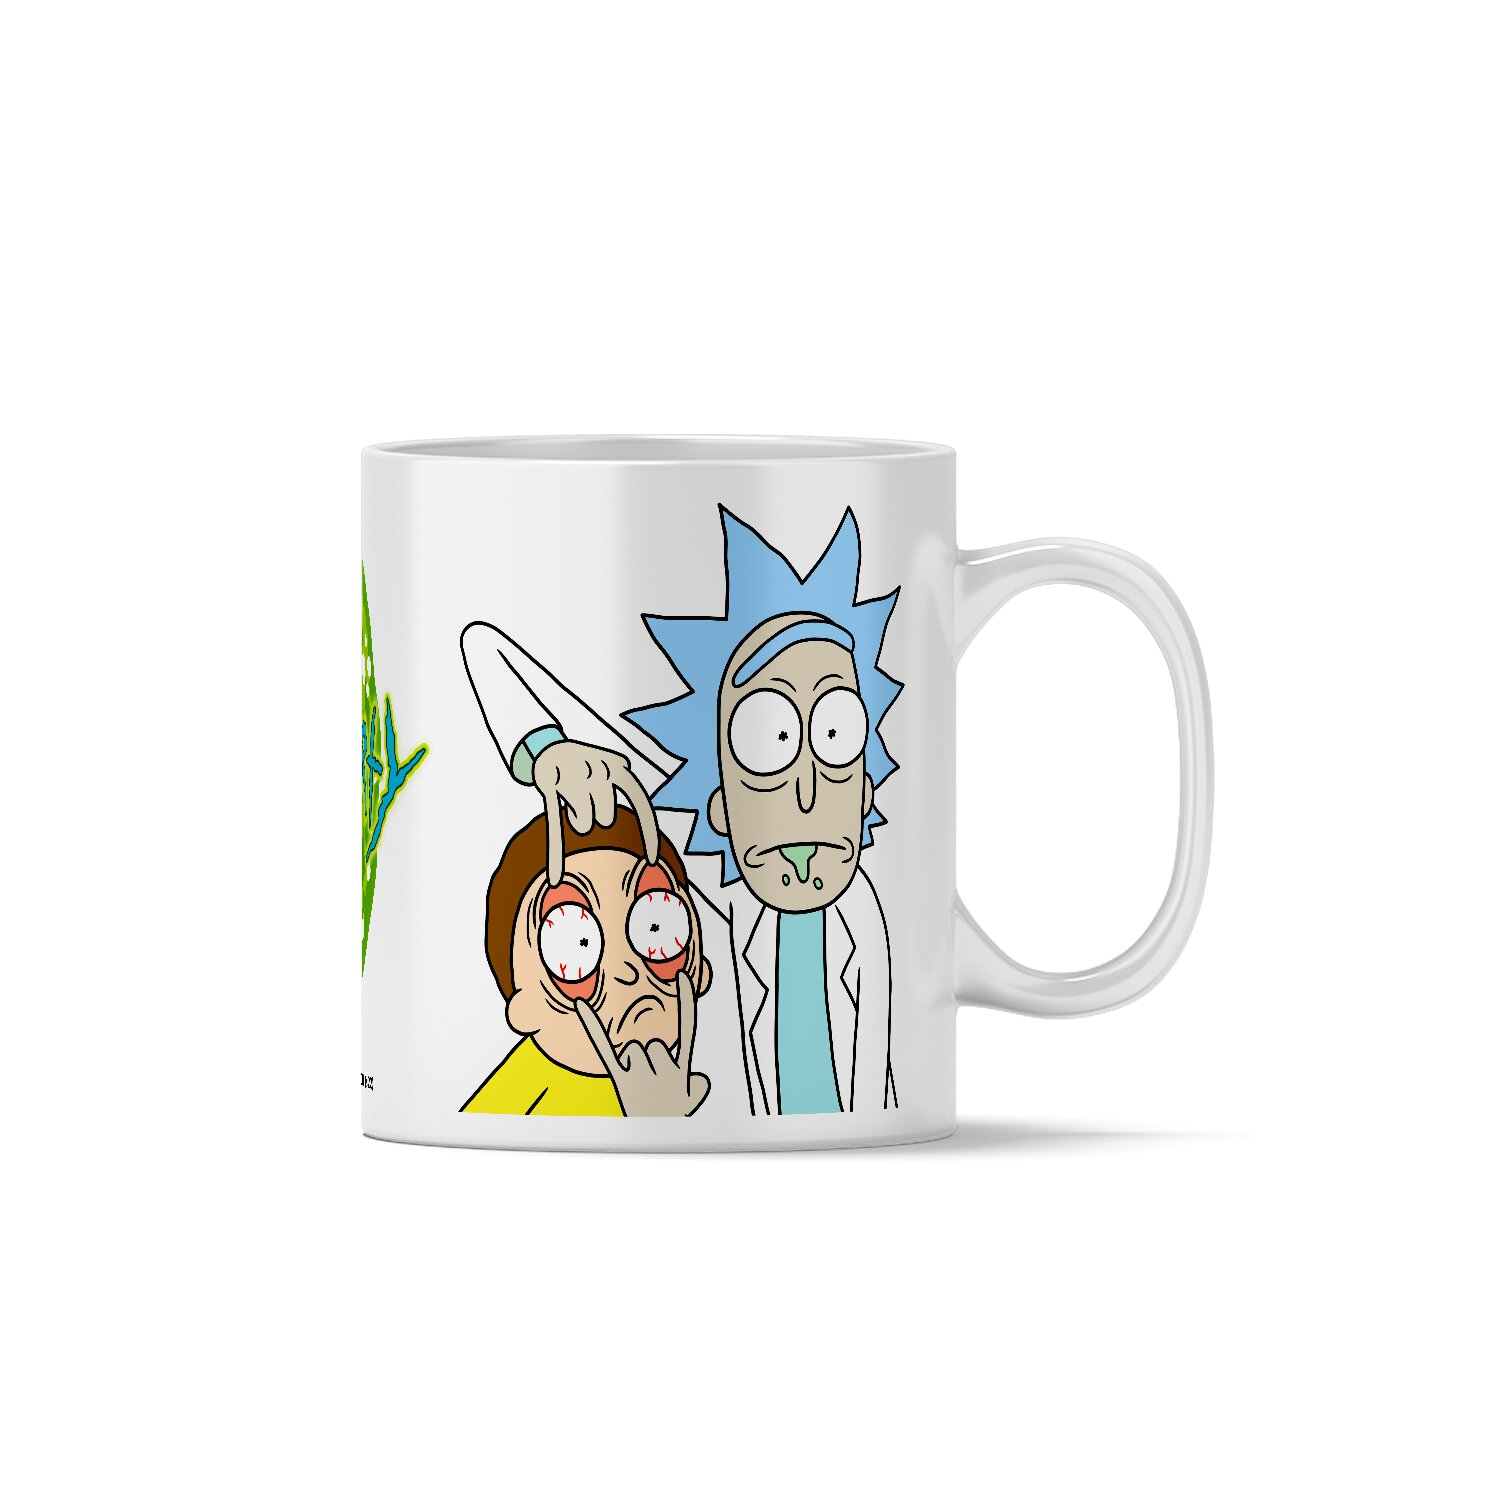 Rick and Morty Kaffee- 330ml Morty Teebecher 007 und Muster